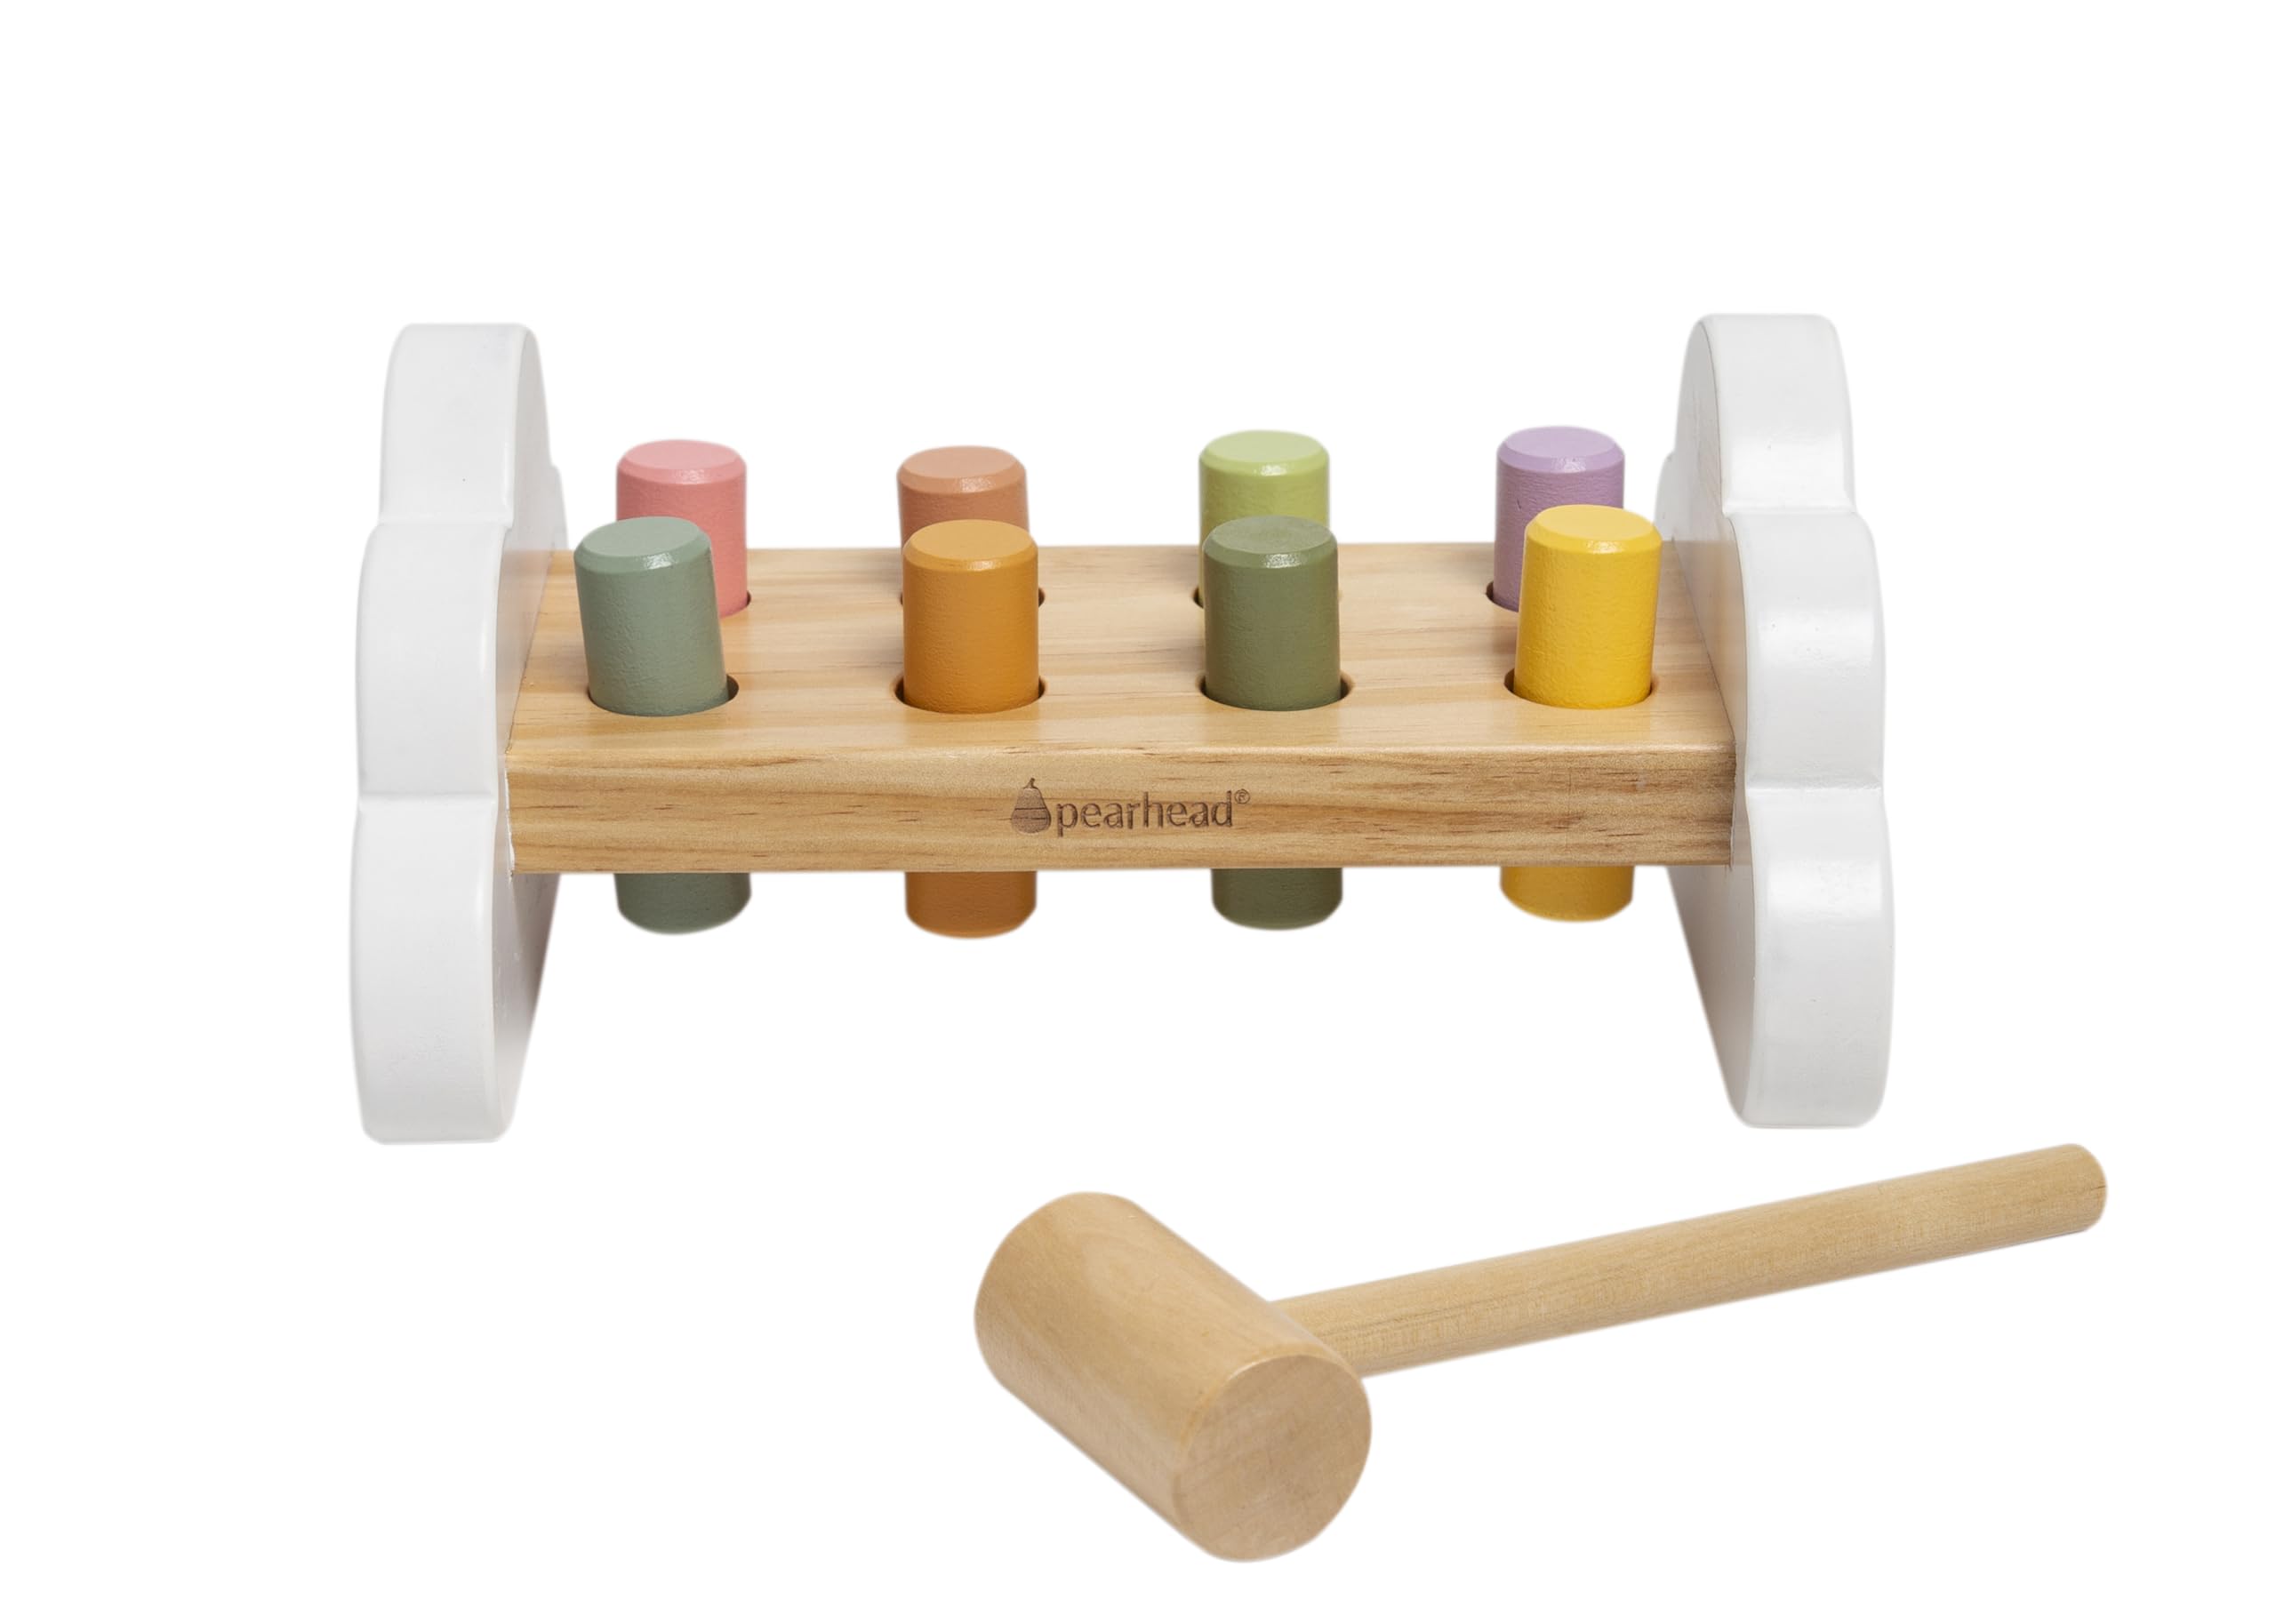 Pearhead Wooden Hammer Bench Toy, Pounding and Hammer Toy, Developmental Interactive Baby and Toddler Toy, 10 Piece Toy Set, 1+ Year, FSC Certified